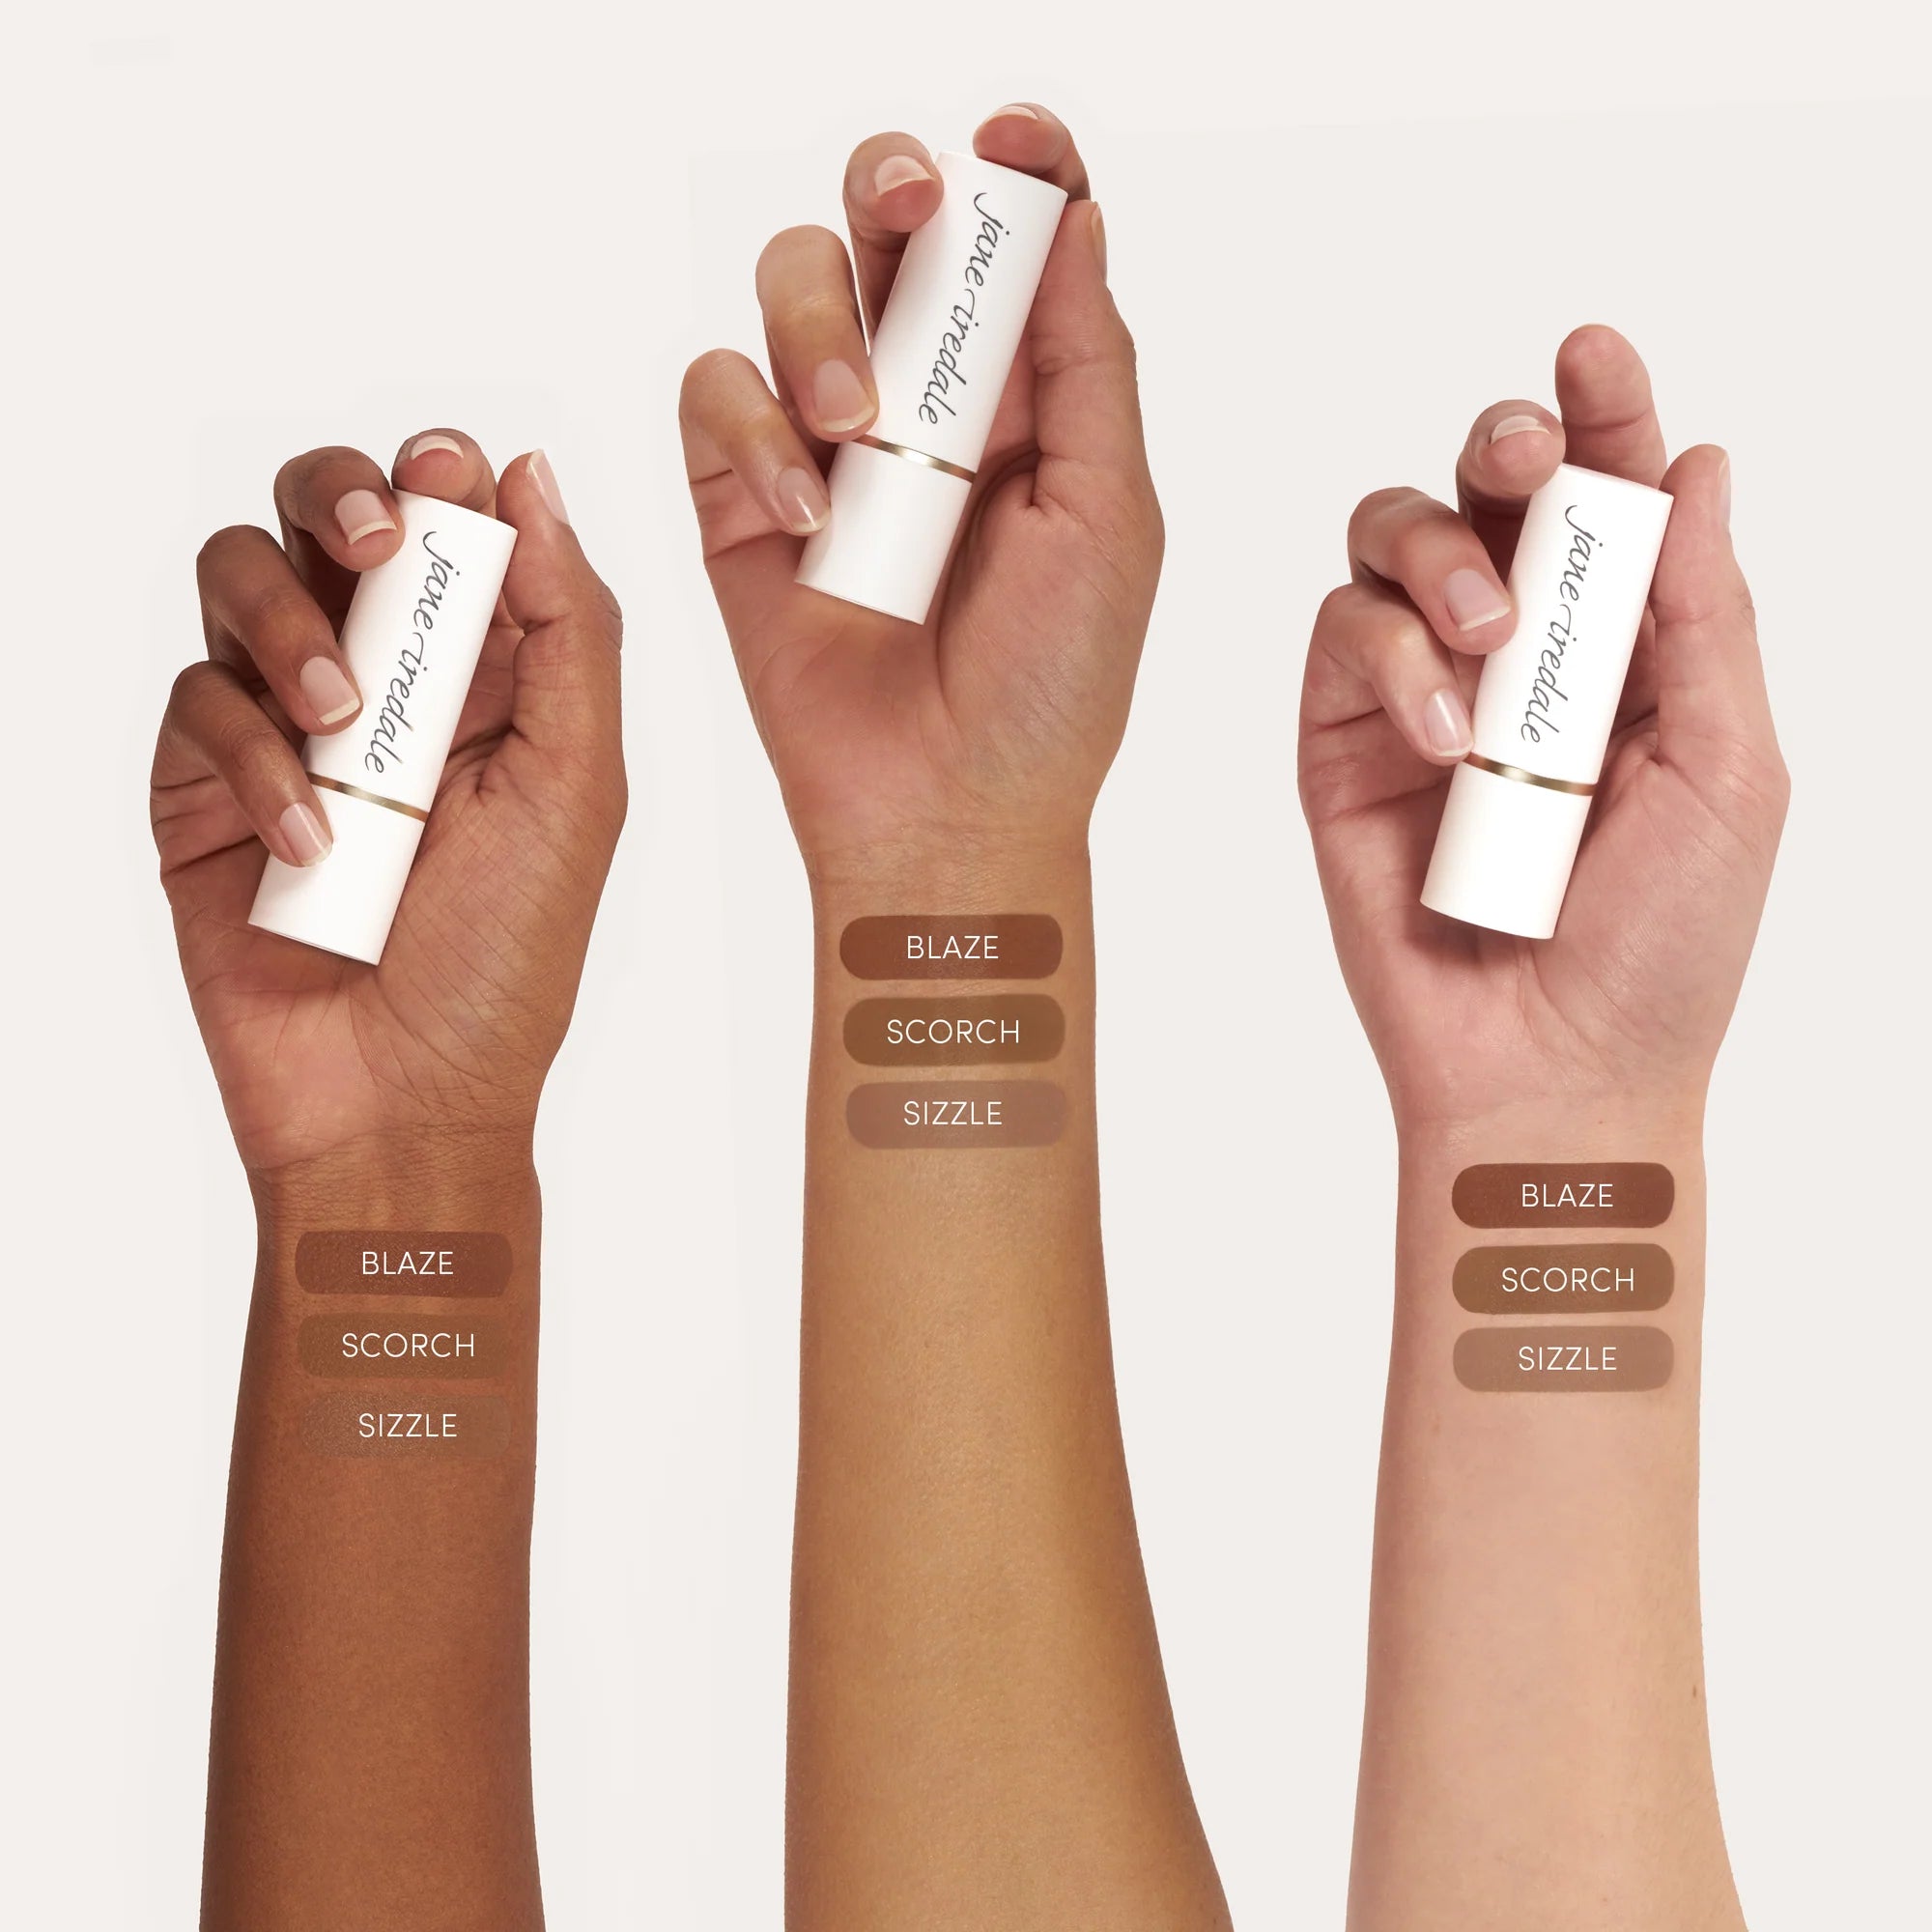 Jane Iredale's Glow Time™ Bronzer Stick swatches chart on different skin tone